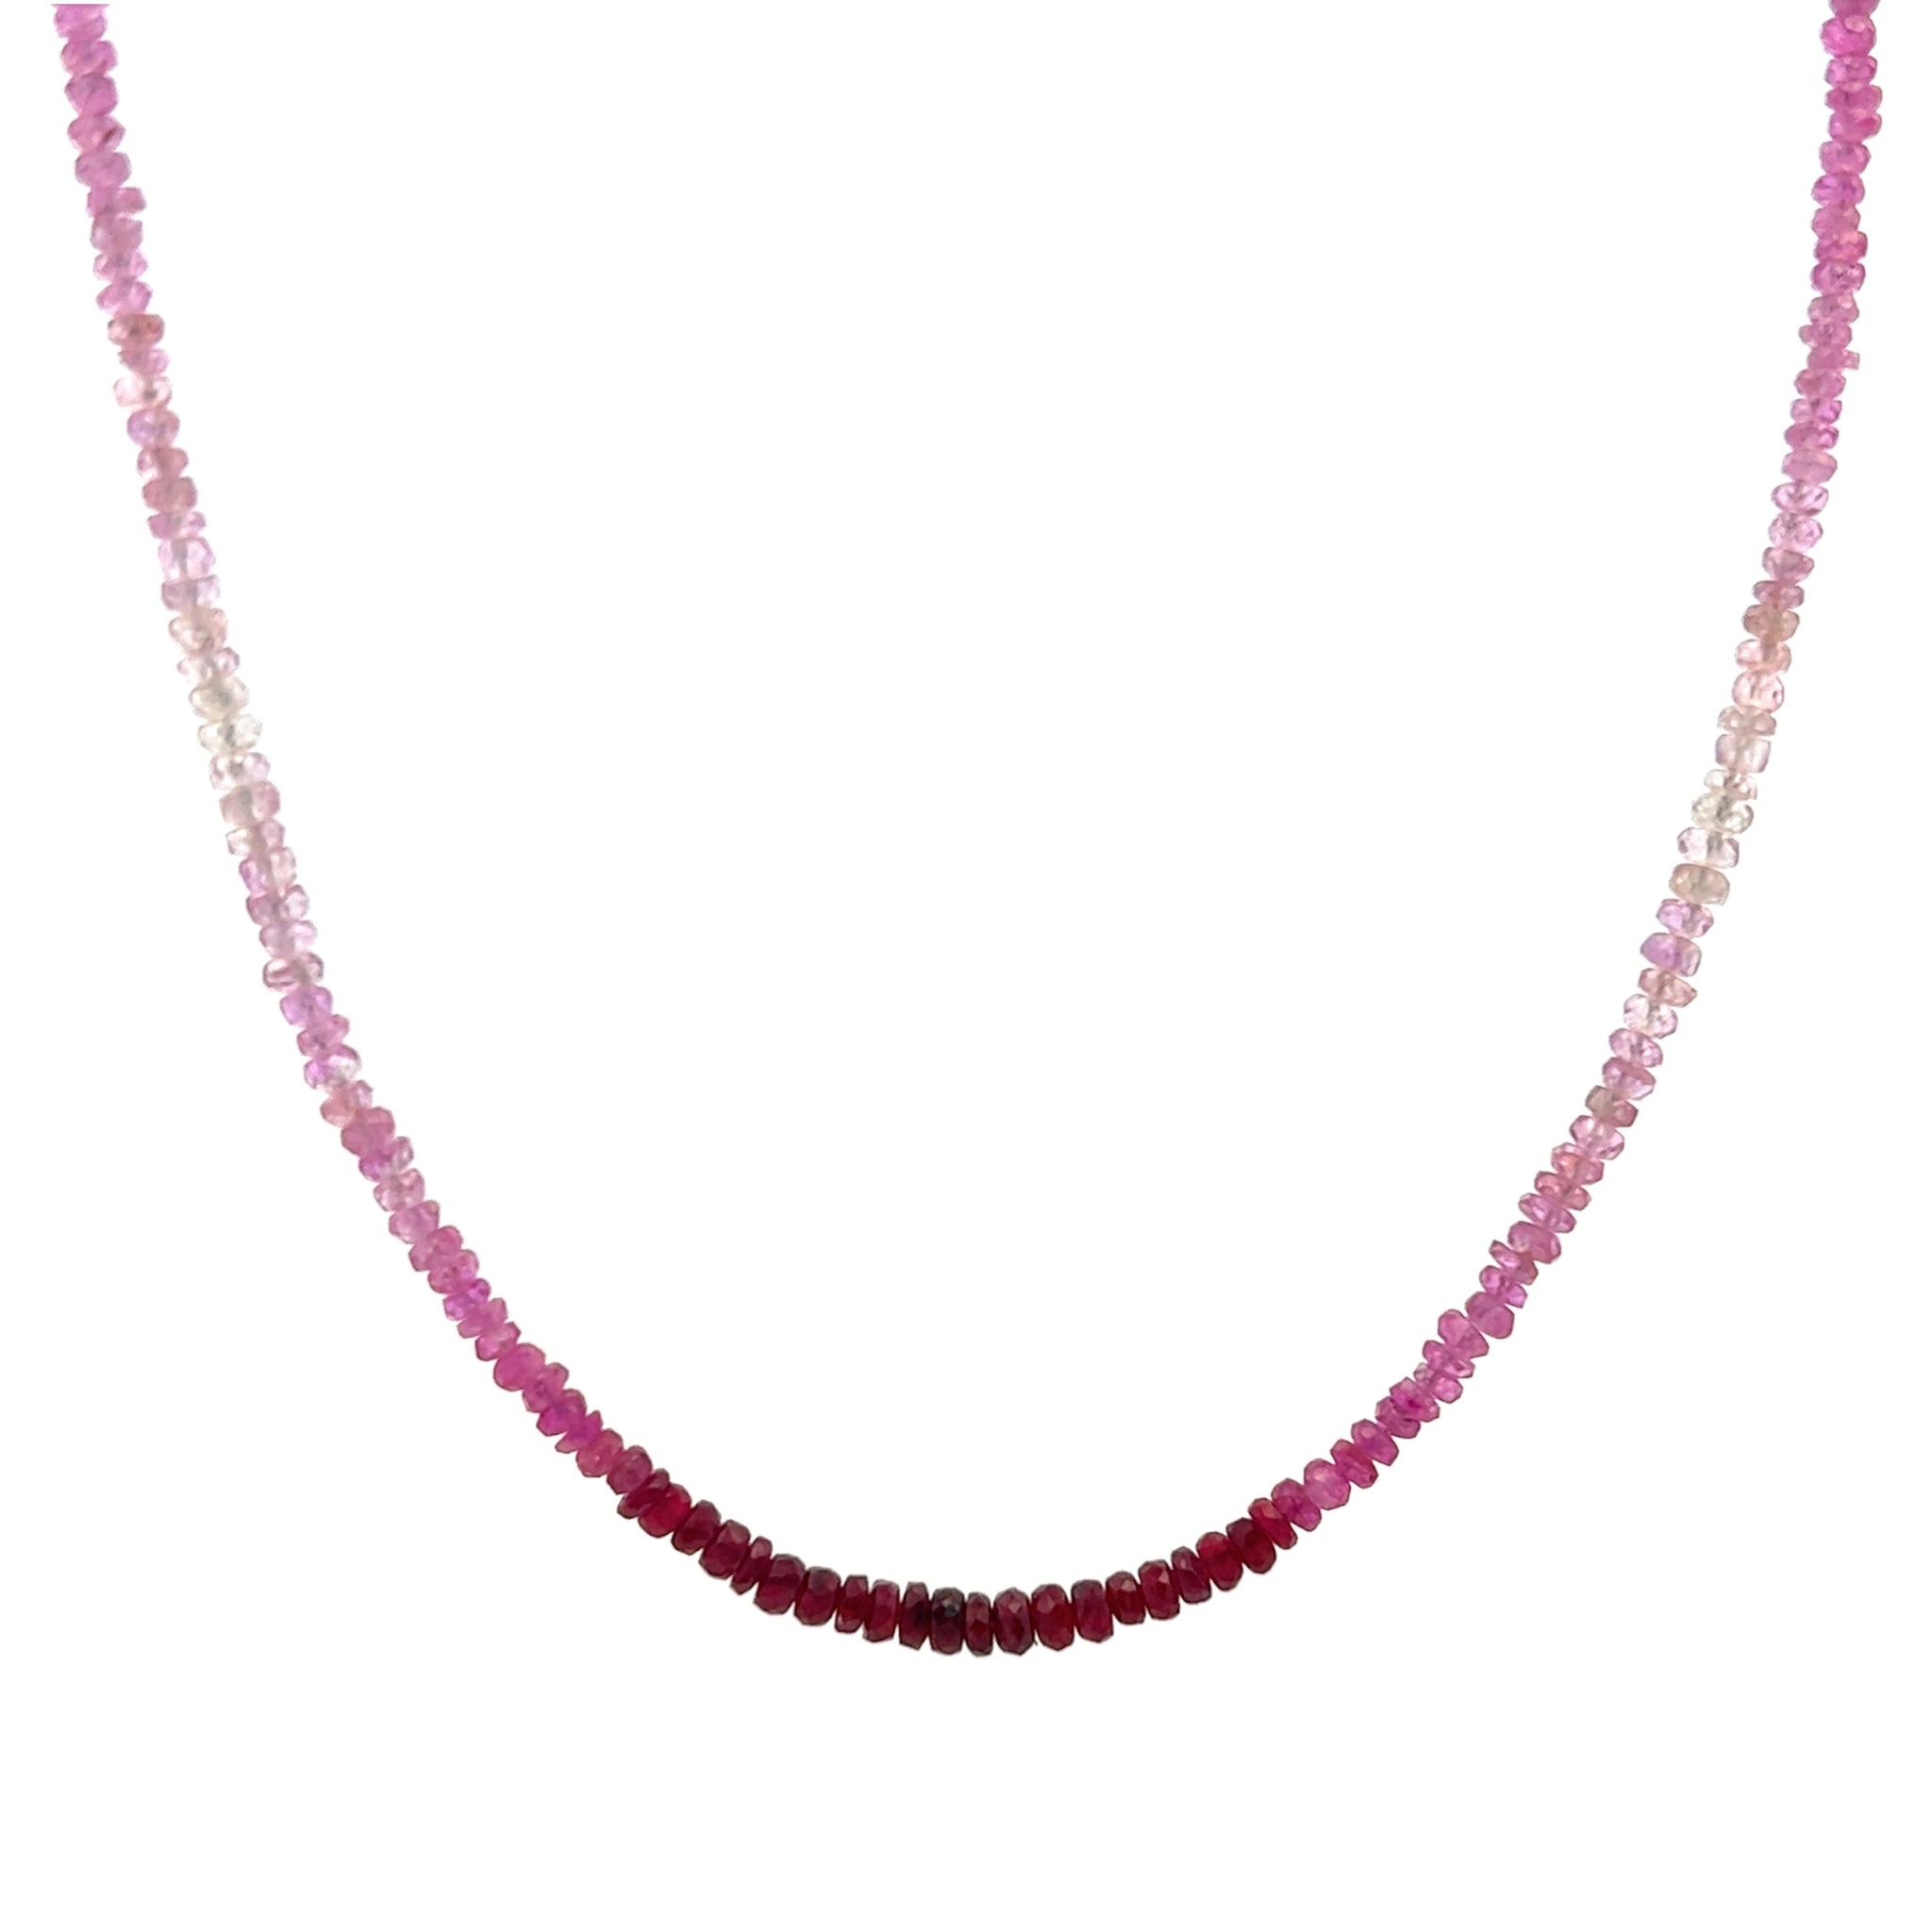 Handmade Necklace Natural Shaded Ruby Gemstone Red Ombre Beaded Jewelry